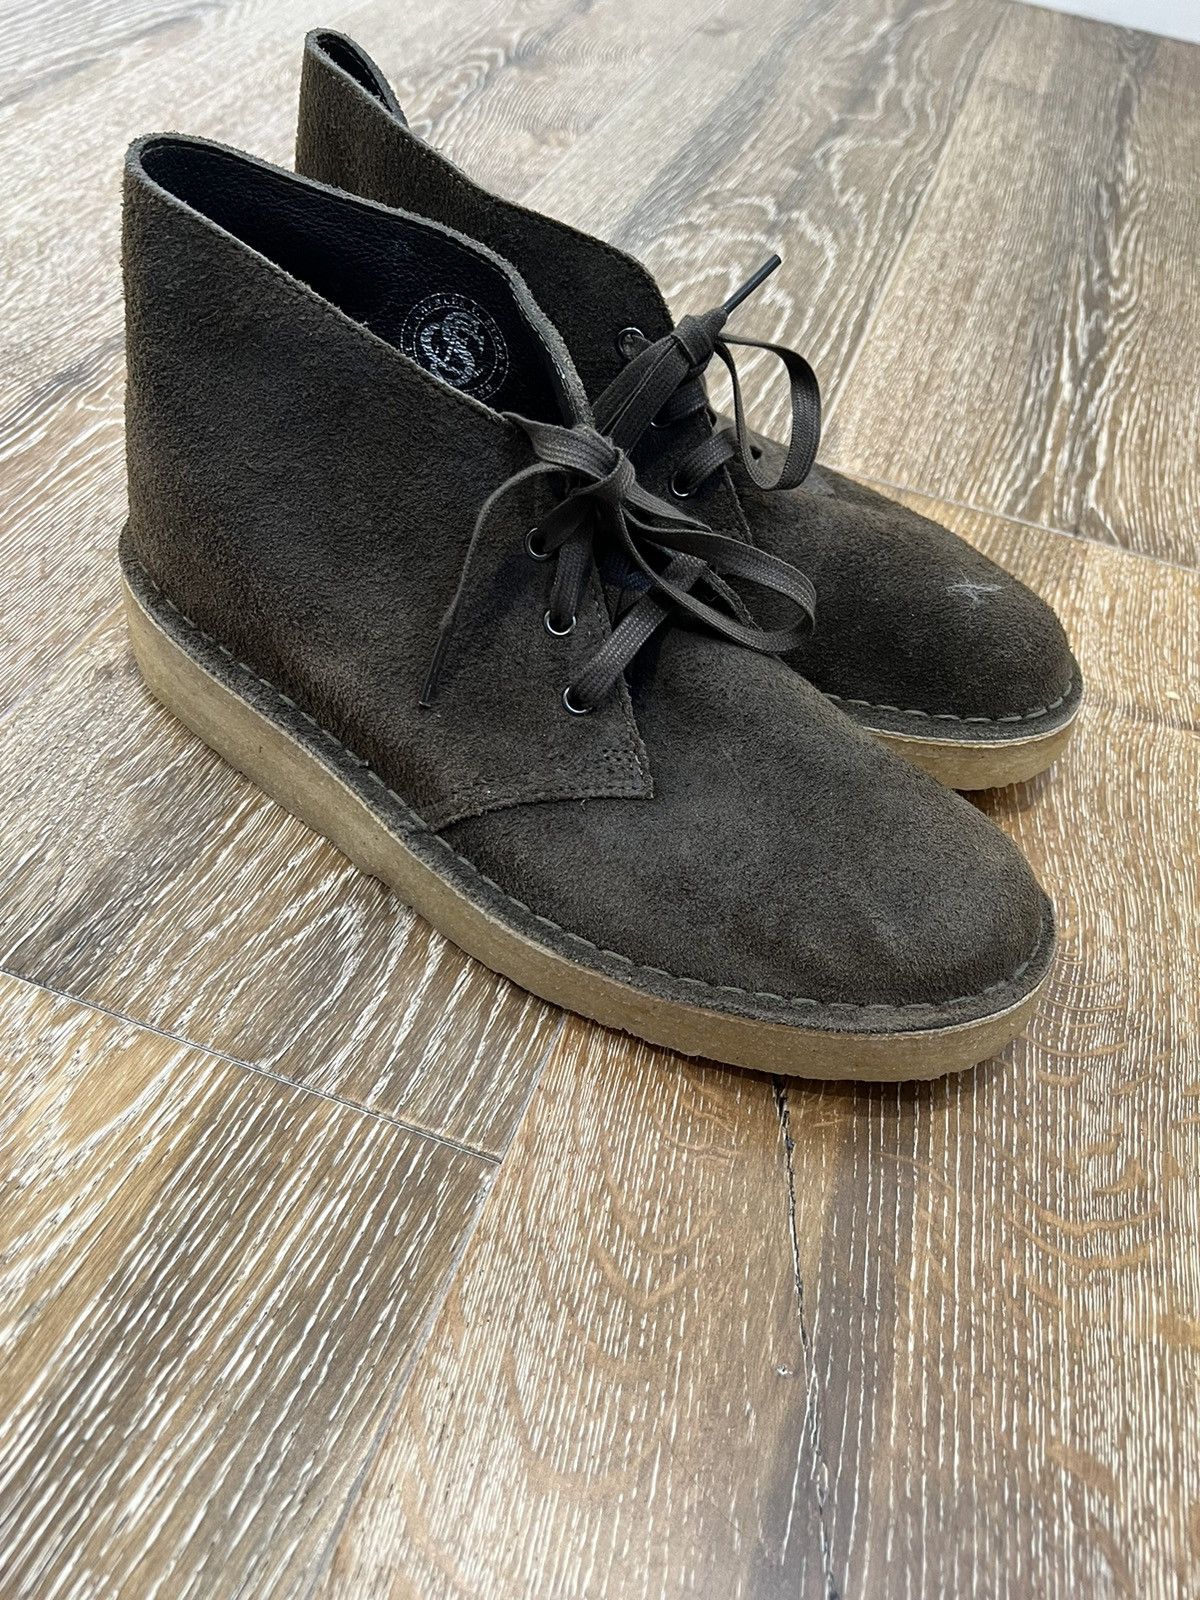 Charles F Stead Clarks | Grailed